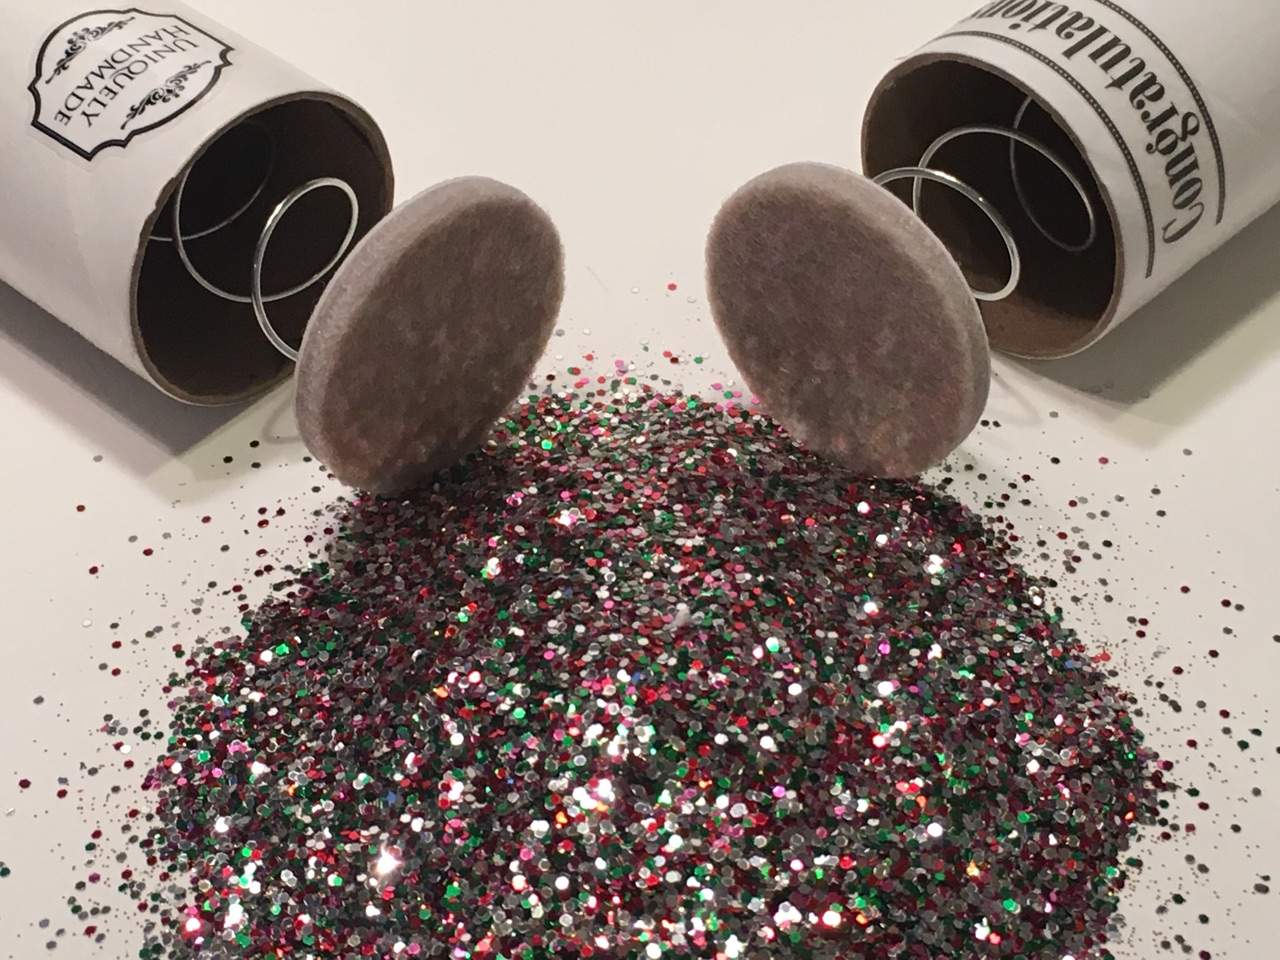 desillusion have Bærbar Spring-Loaded Glitter Bomb Sent By Best Pranks By Mail